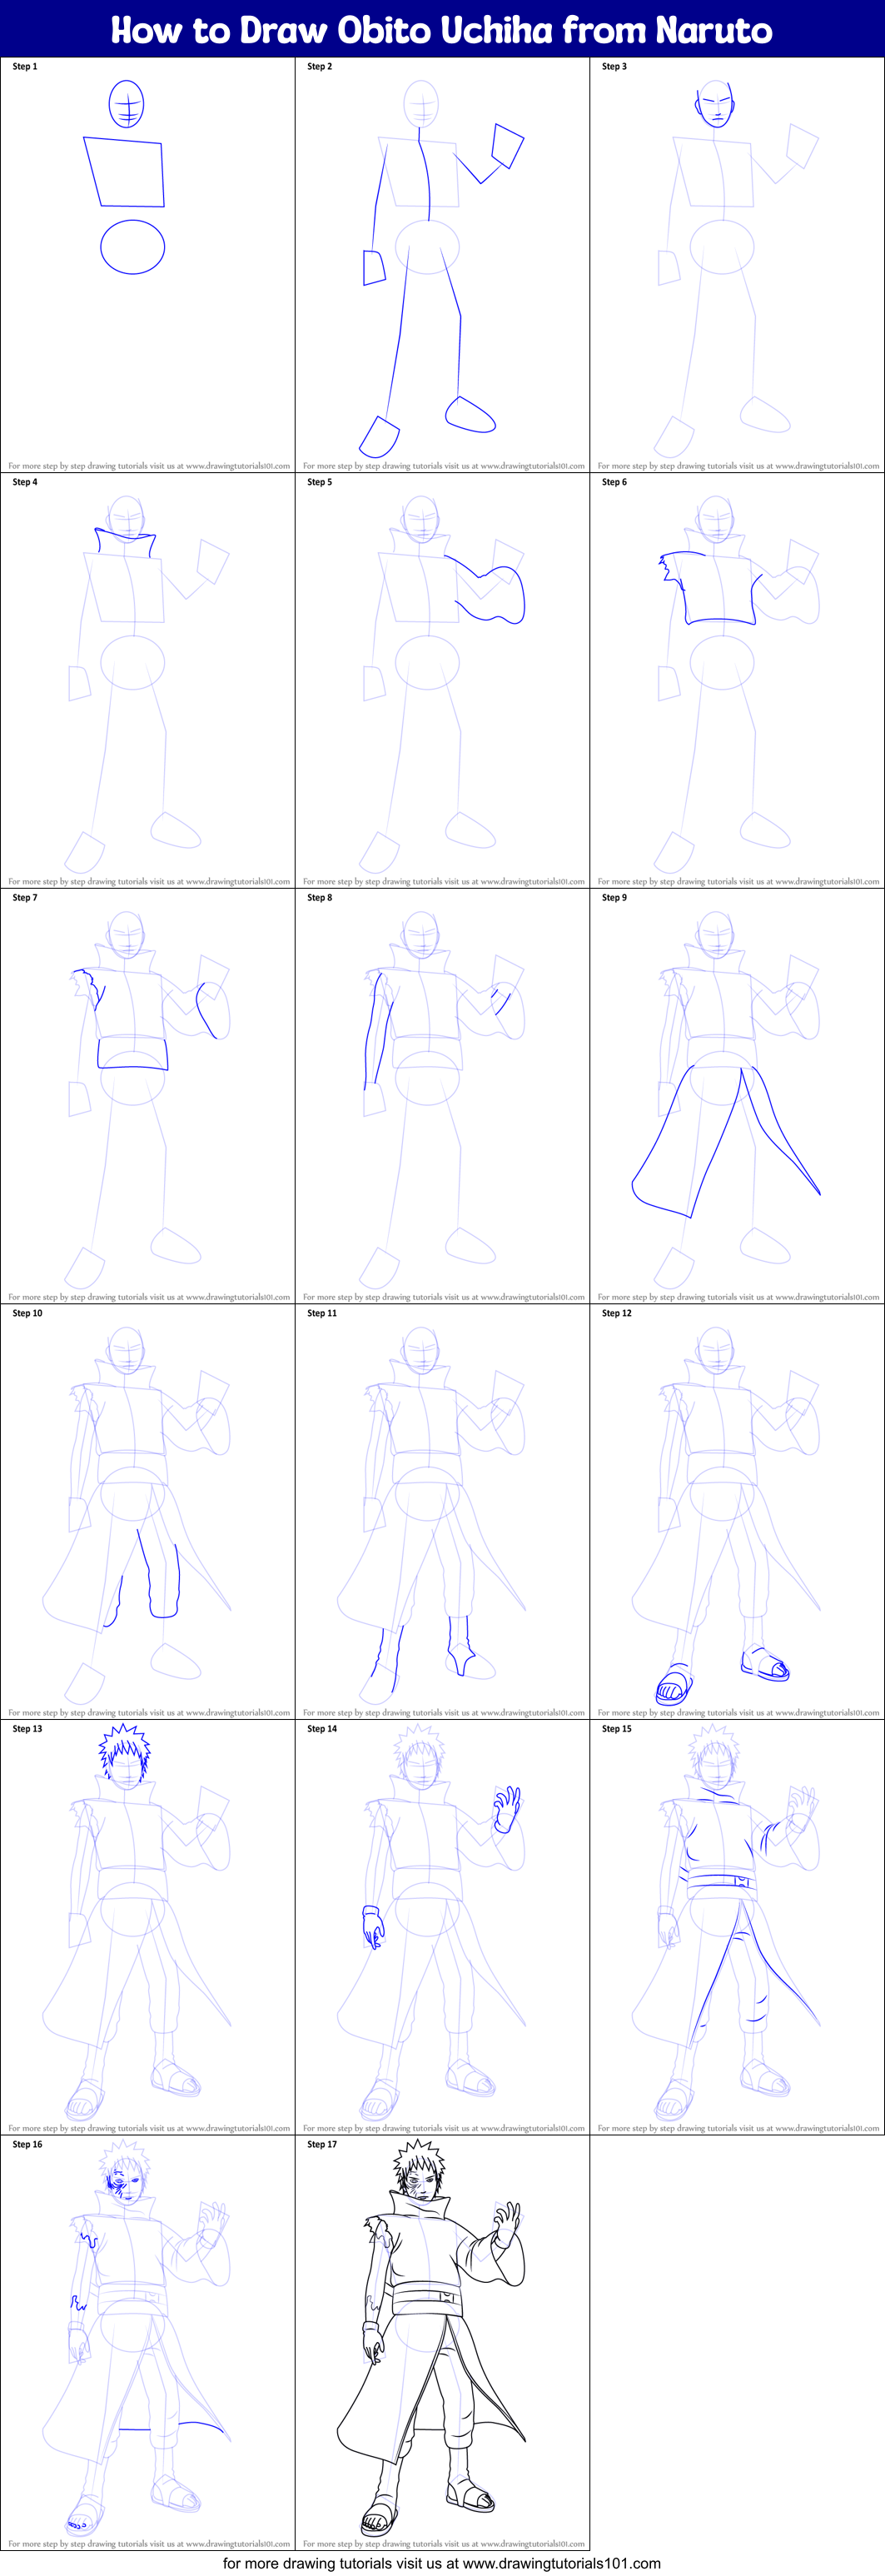 Best How To Draw Obito Uchiha Step By Step of all time Don t miss out 